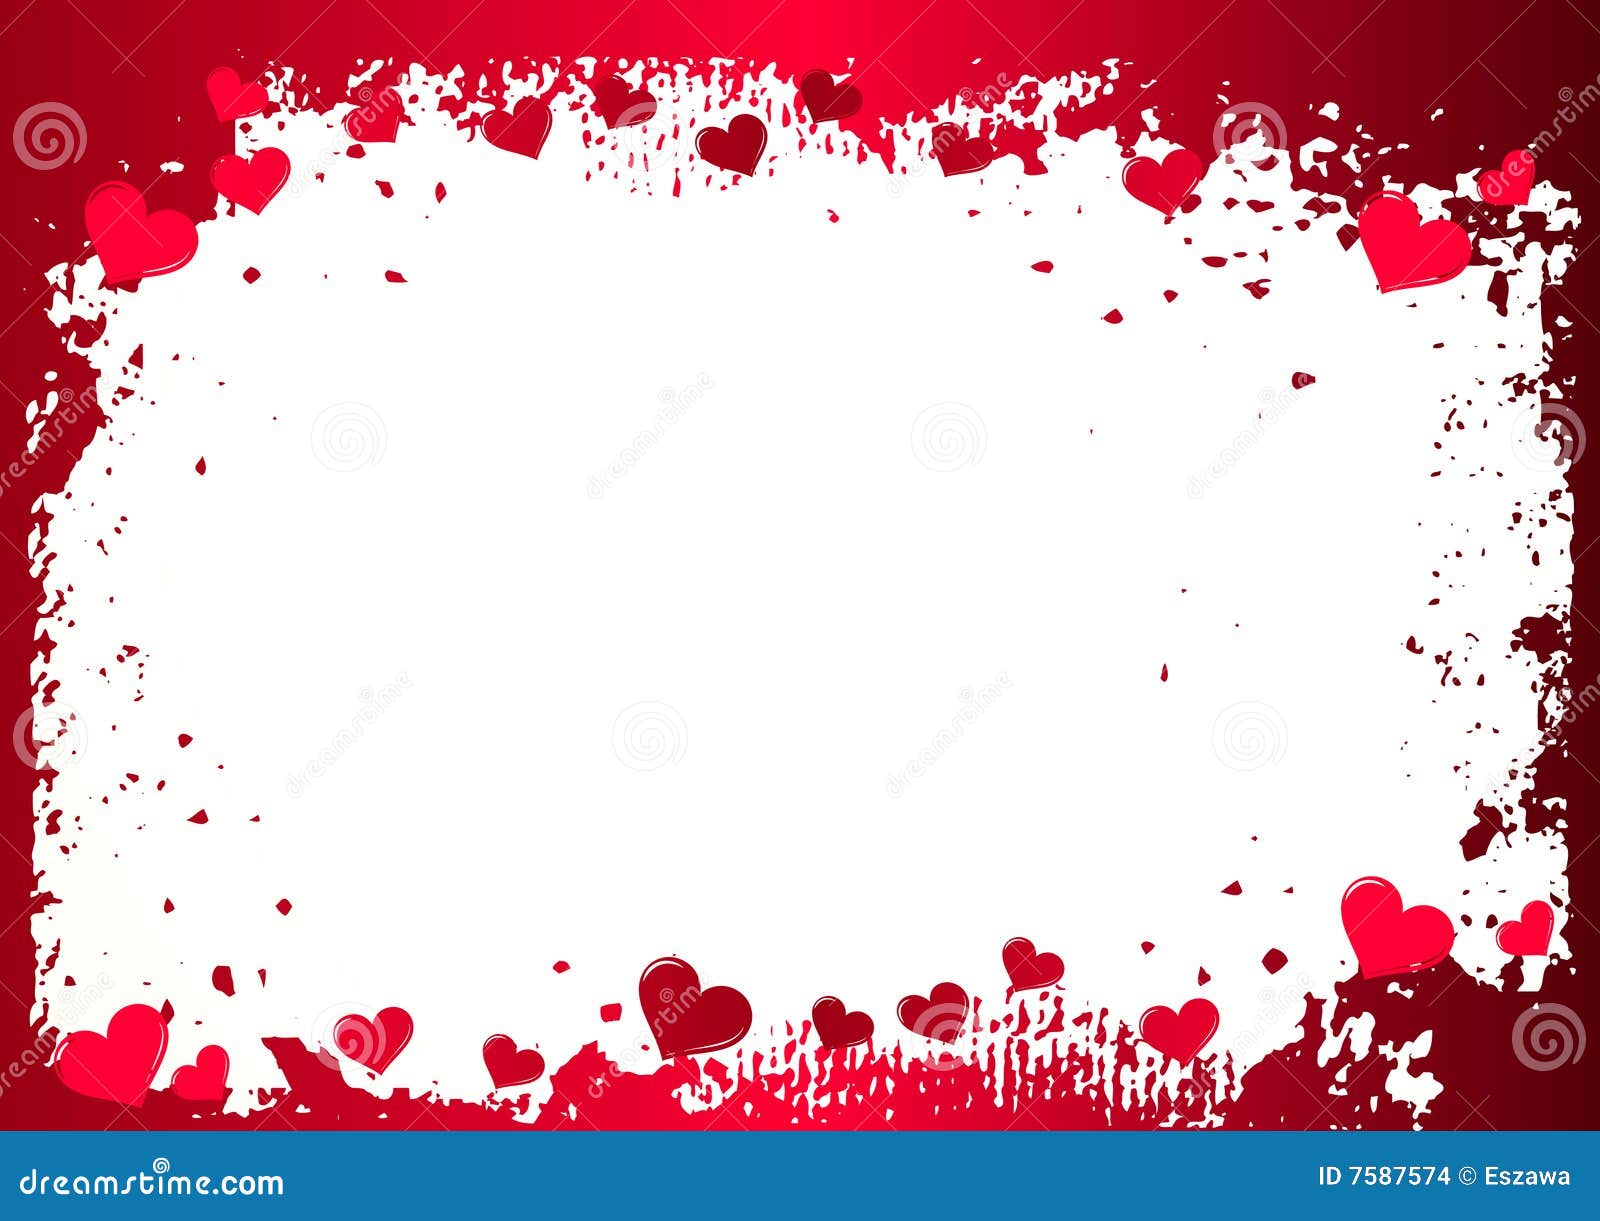 valentines day background clipart - photo #29